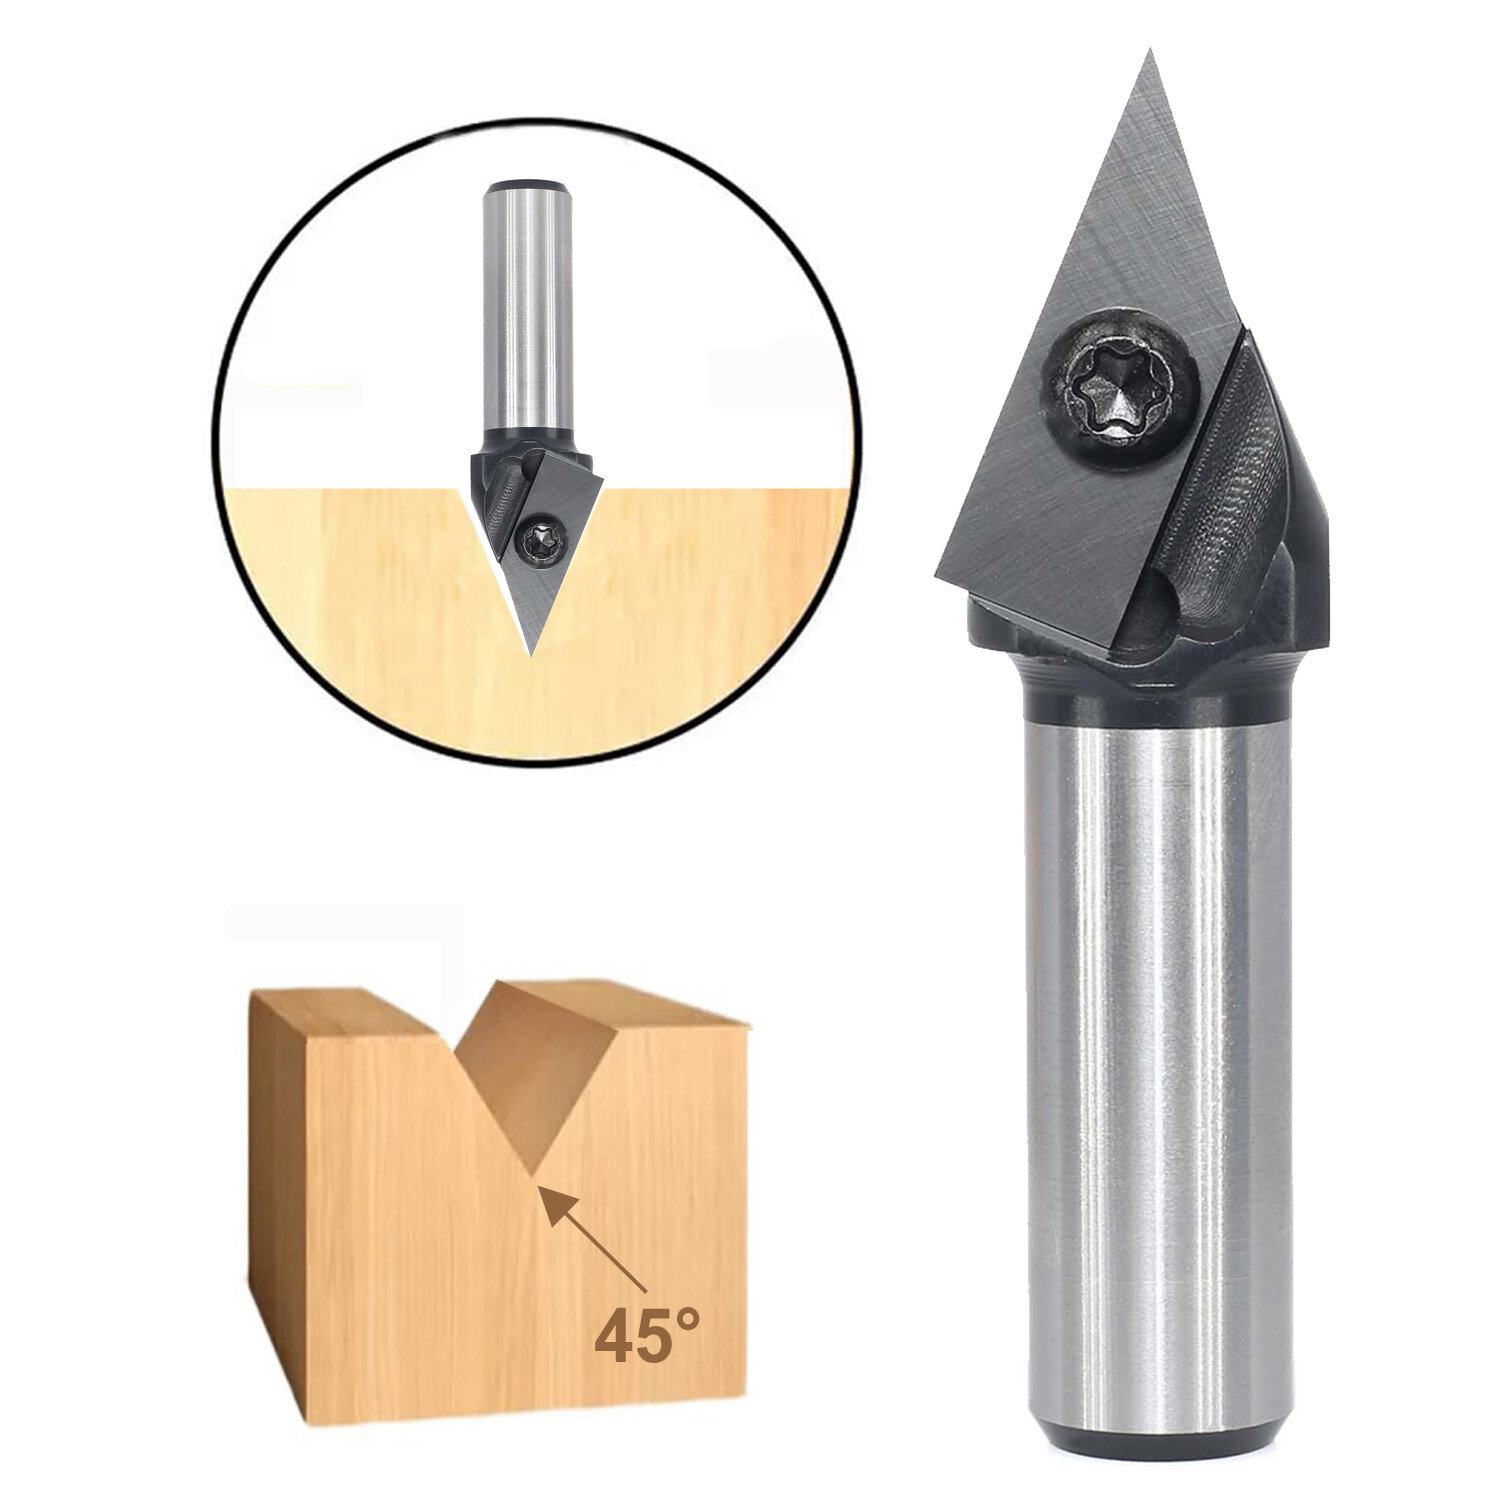 

1/2 Inch 1/4 Inch 6mm 12mm Shank 45 Degree V-Groove Carbide Insert Wood CNC Router Bits Milling Cutter for Woodworking E